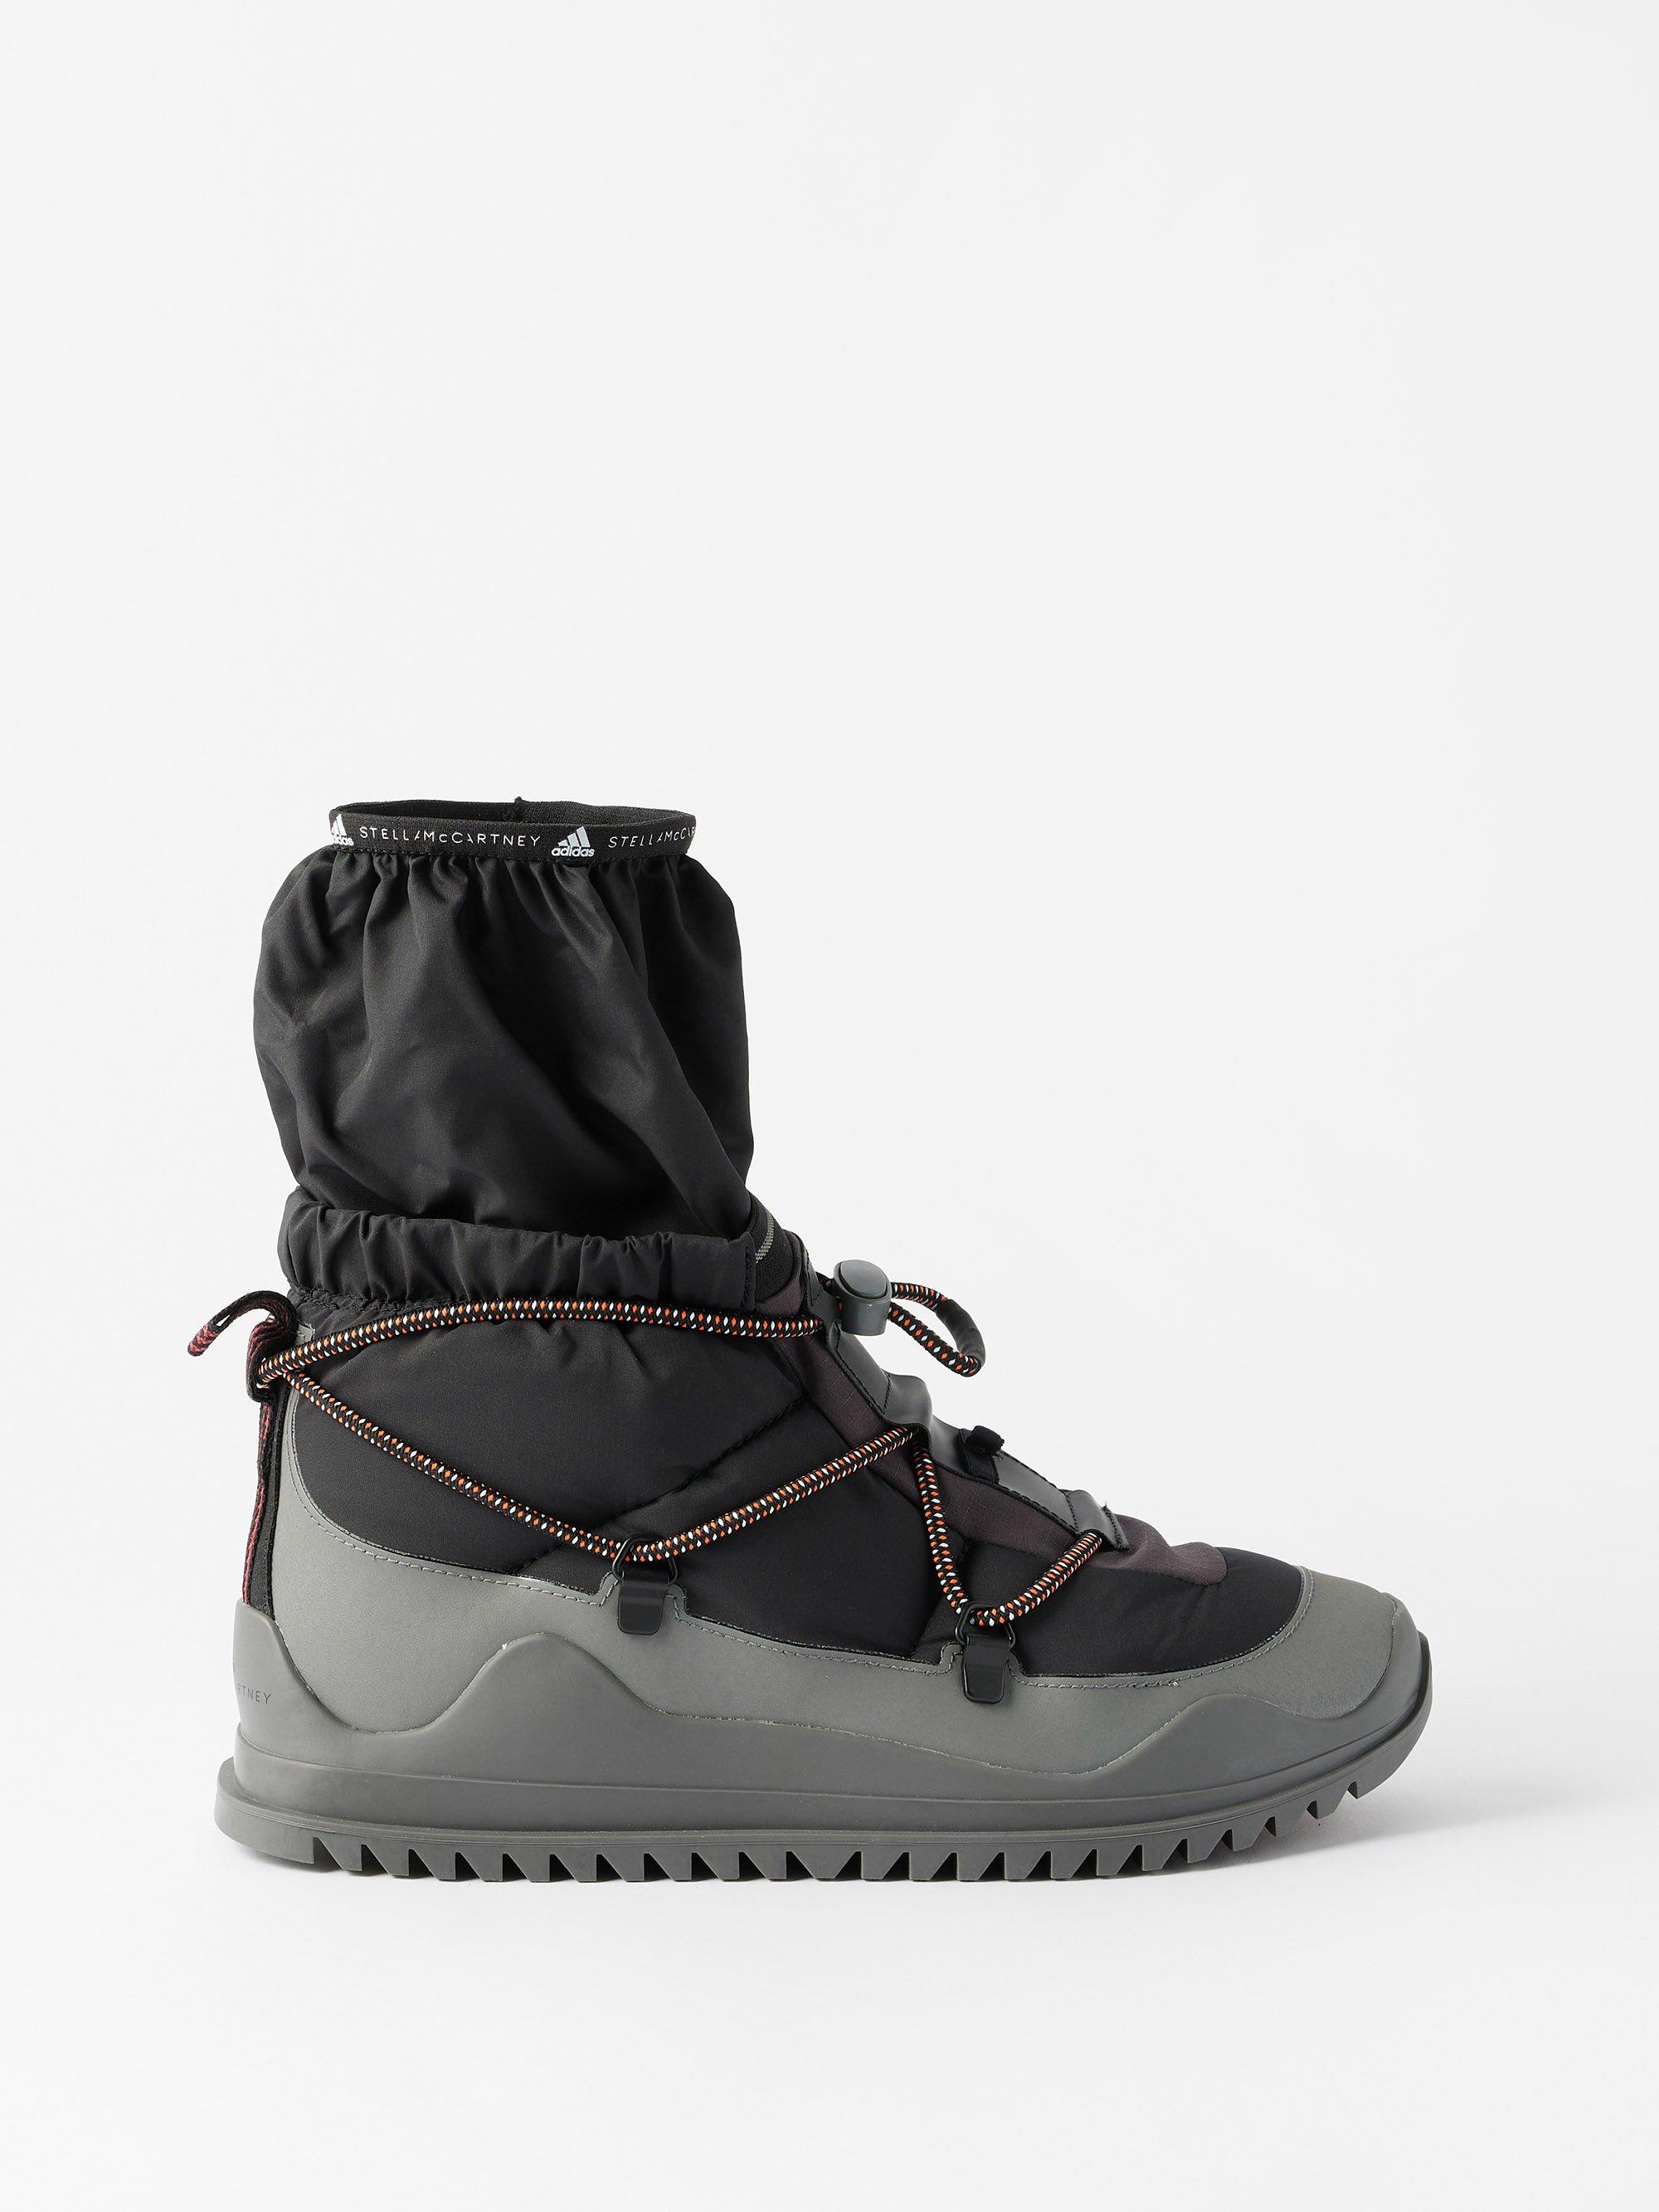 adidas By Stella McCartney Cold.rdy Shell And Rubber Boots in Black | Lyst